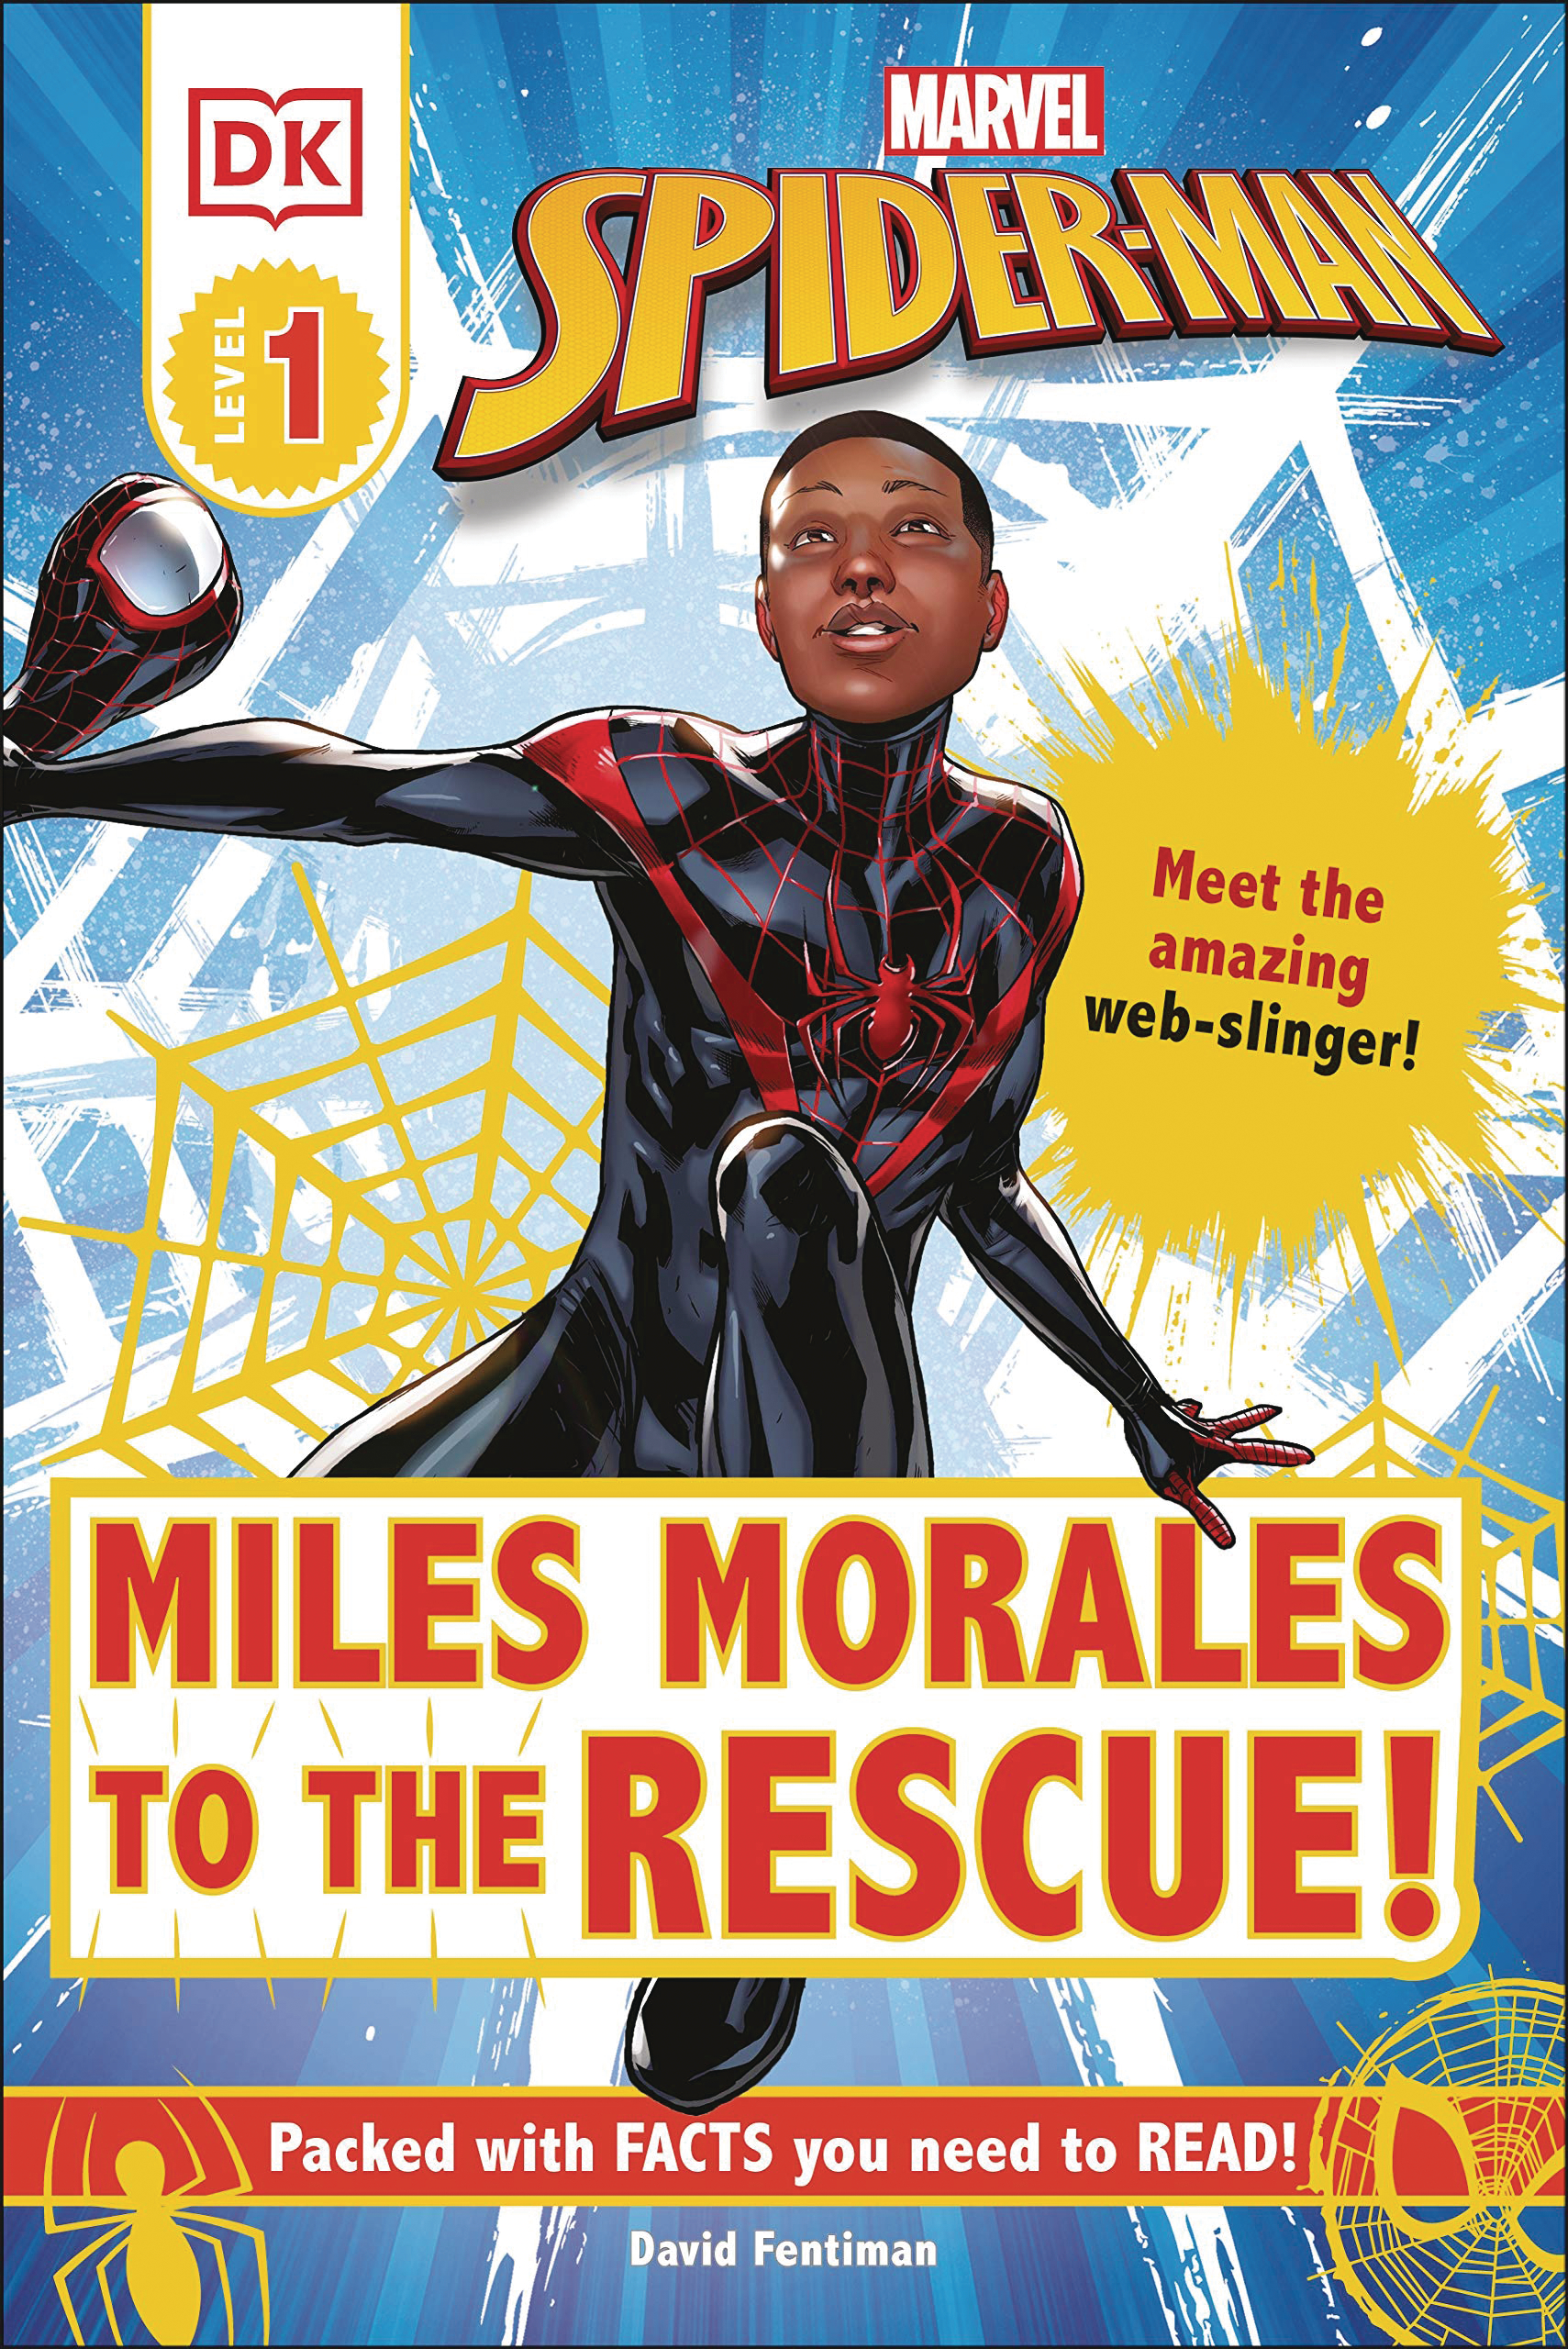 Marvel Spider-Man Miles Morales To Rescue Soft Cover